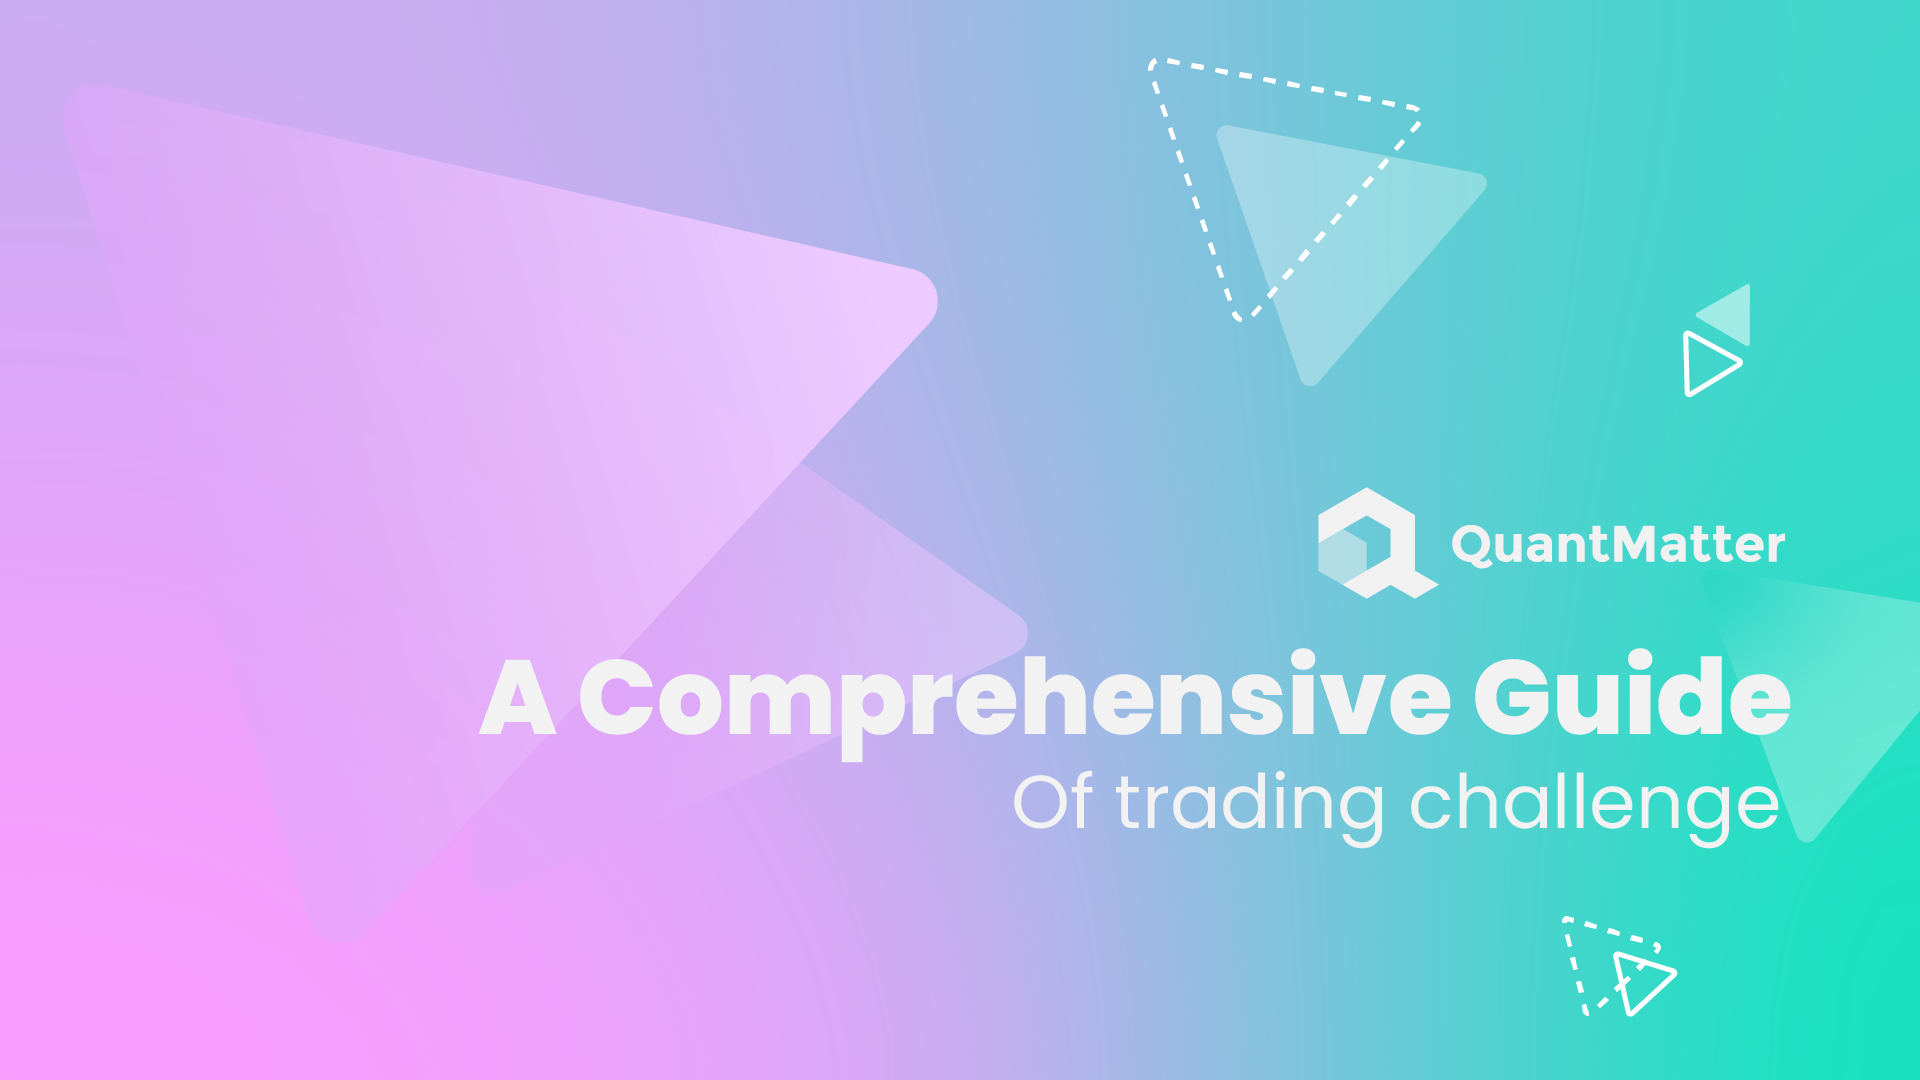 What Are The Strategies for Overcoming the Trading Challenge?